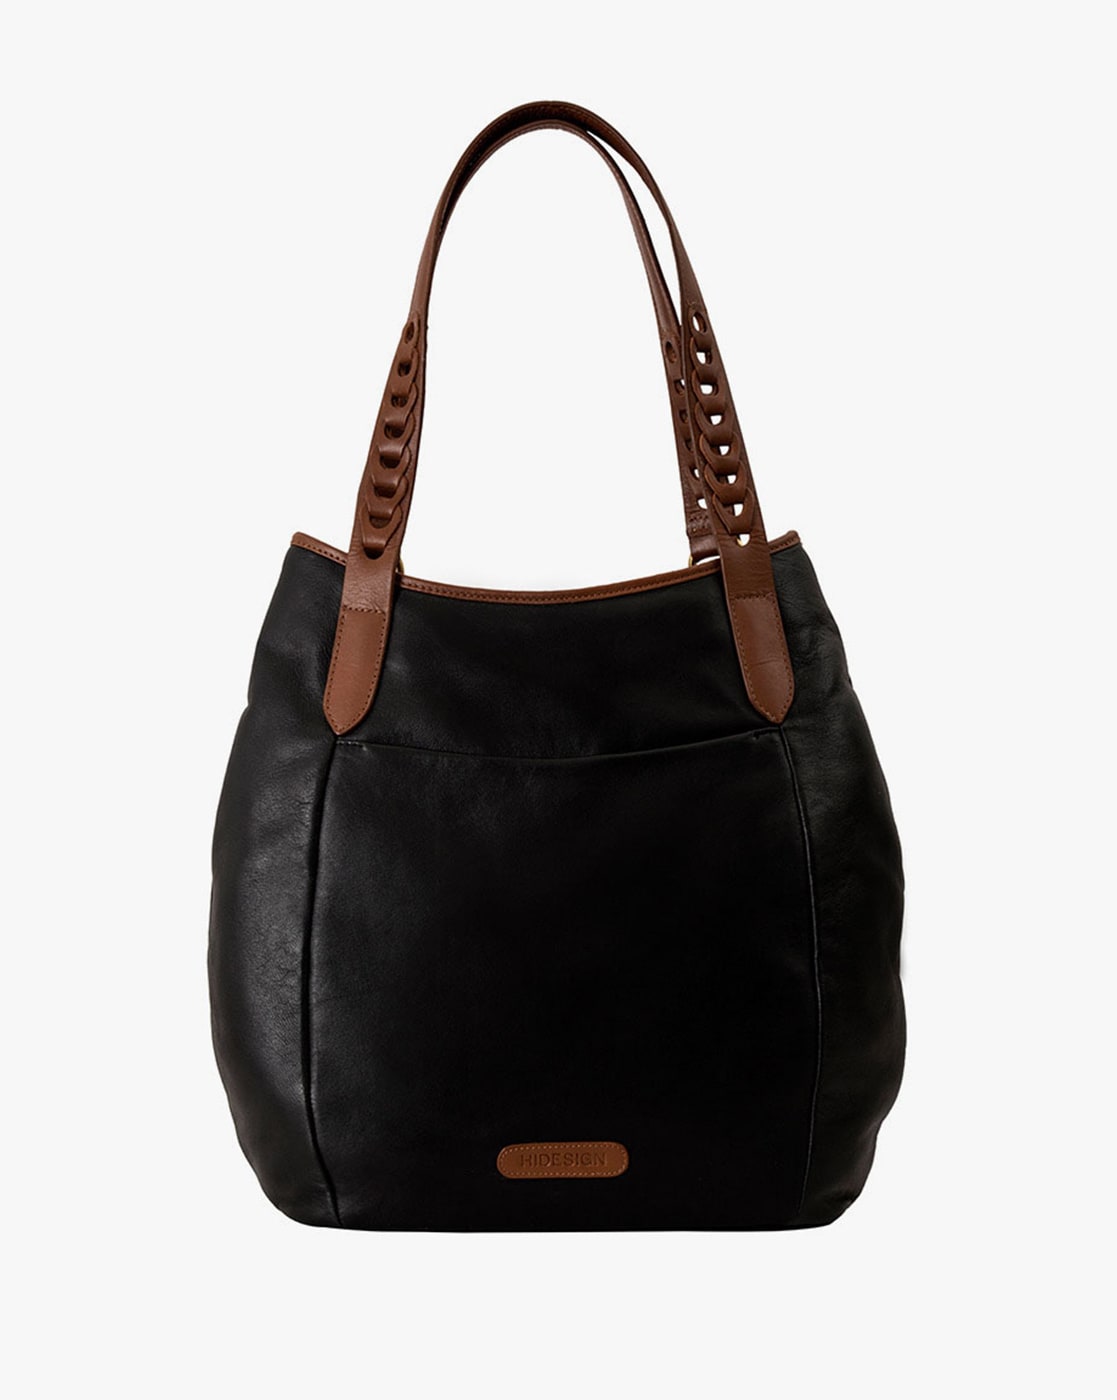 Stella Mccartney Frayme Small Zipped Shoulder Bag Women Frayme Medium  Leather Lady Handbag With Purse Hobo Bags Luxury Designer Black Gold From  Maoxiong, $92.17 | DHgate.Com